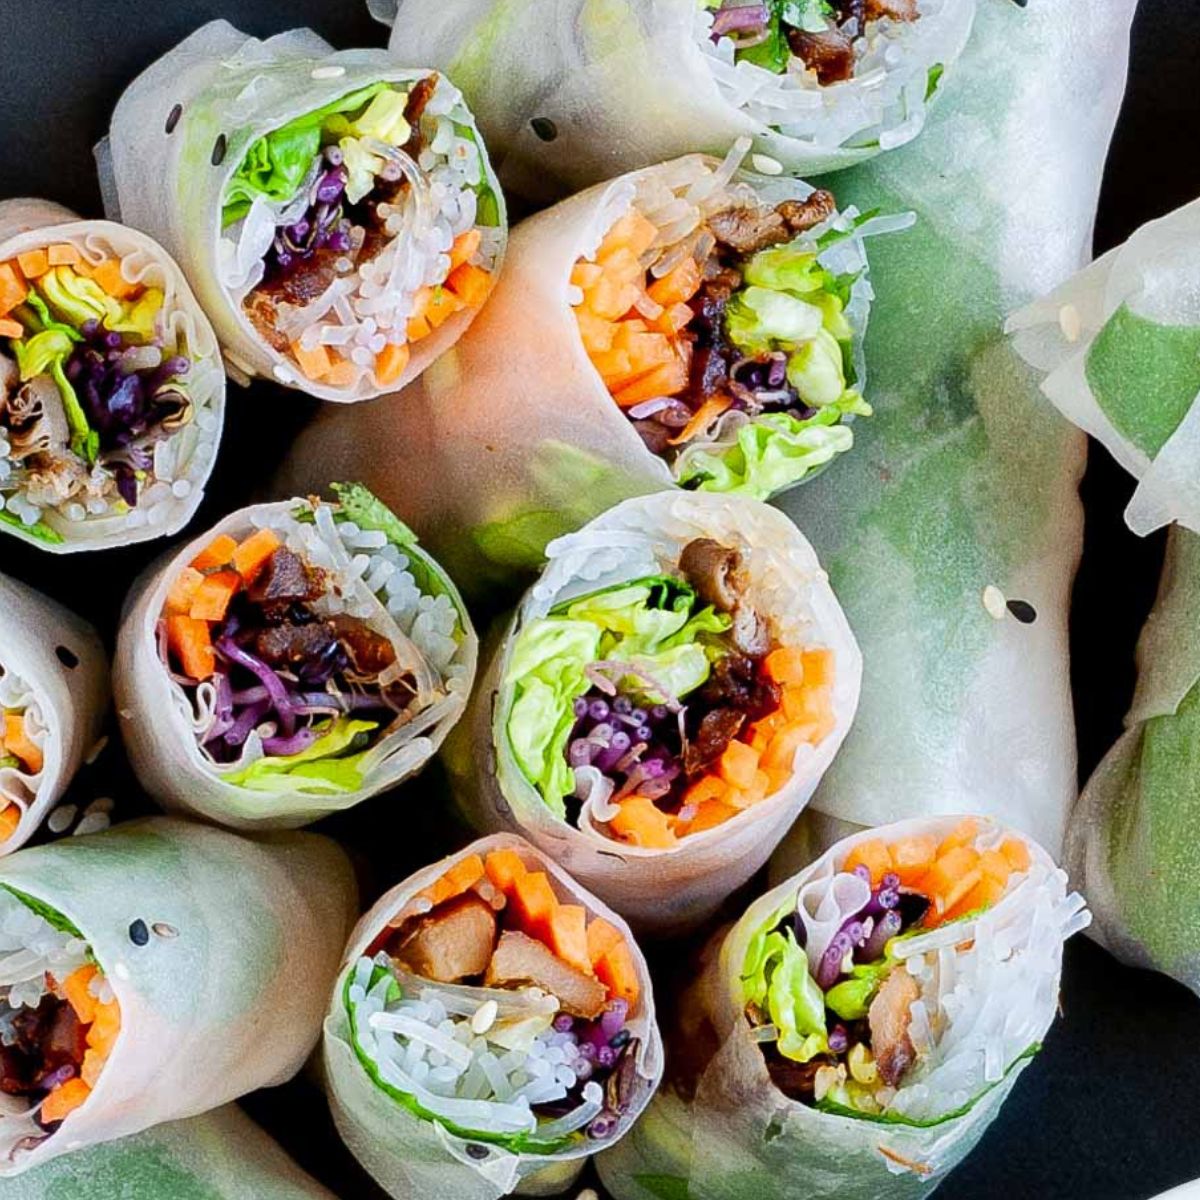 Shredded carrots, pruple cabbage and lettuce with mushroom slices and vermicelli noodles are wrapped in rice paper and cut in half. The rolls are placed on a black plate. 